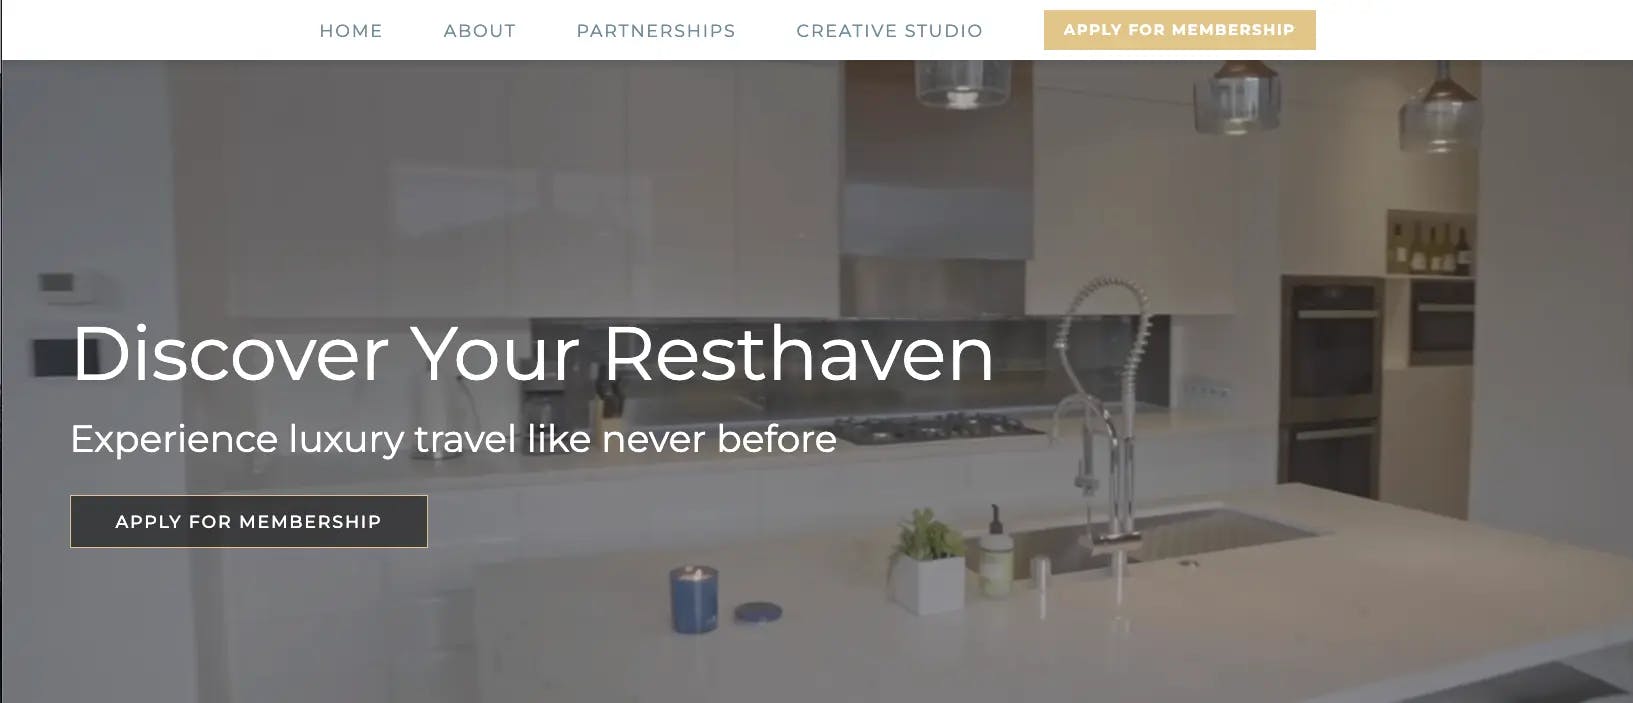 Resthaven Homepage 